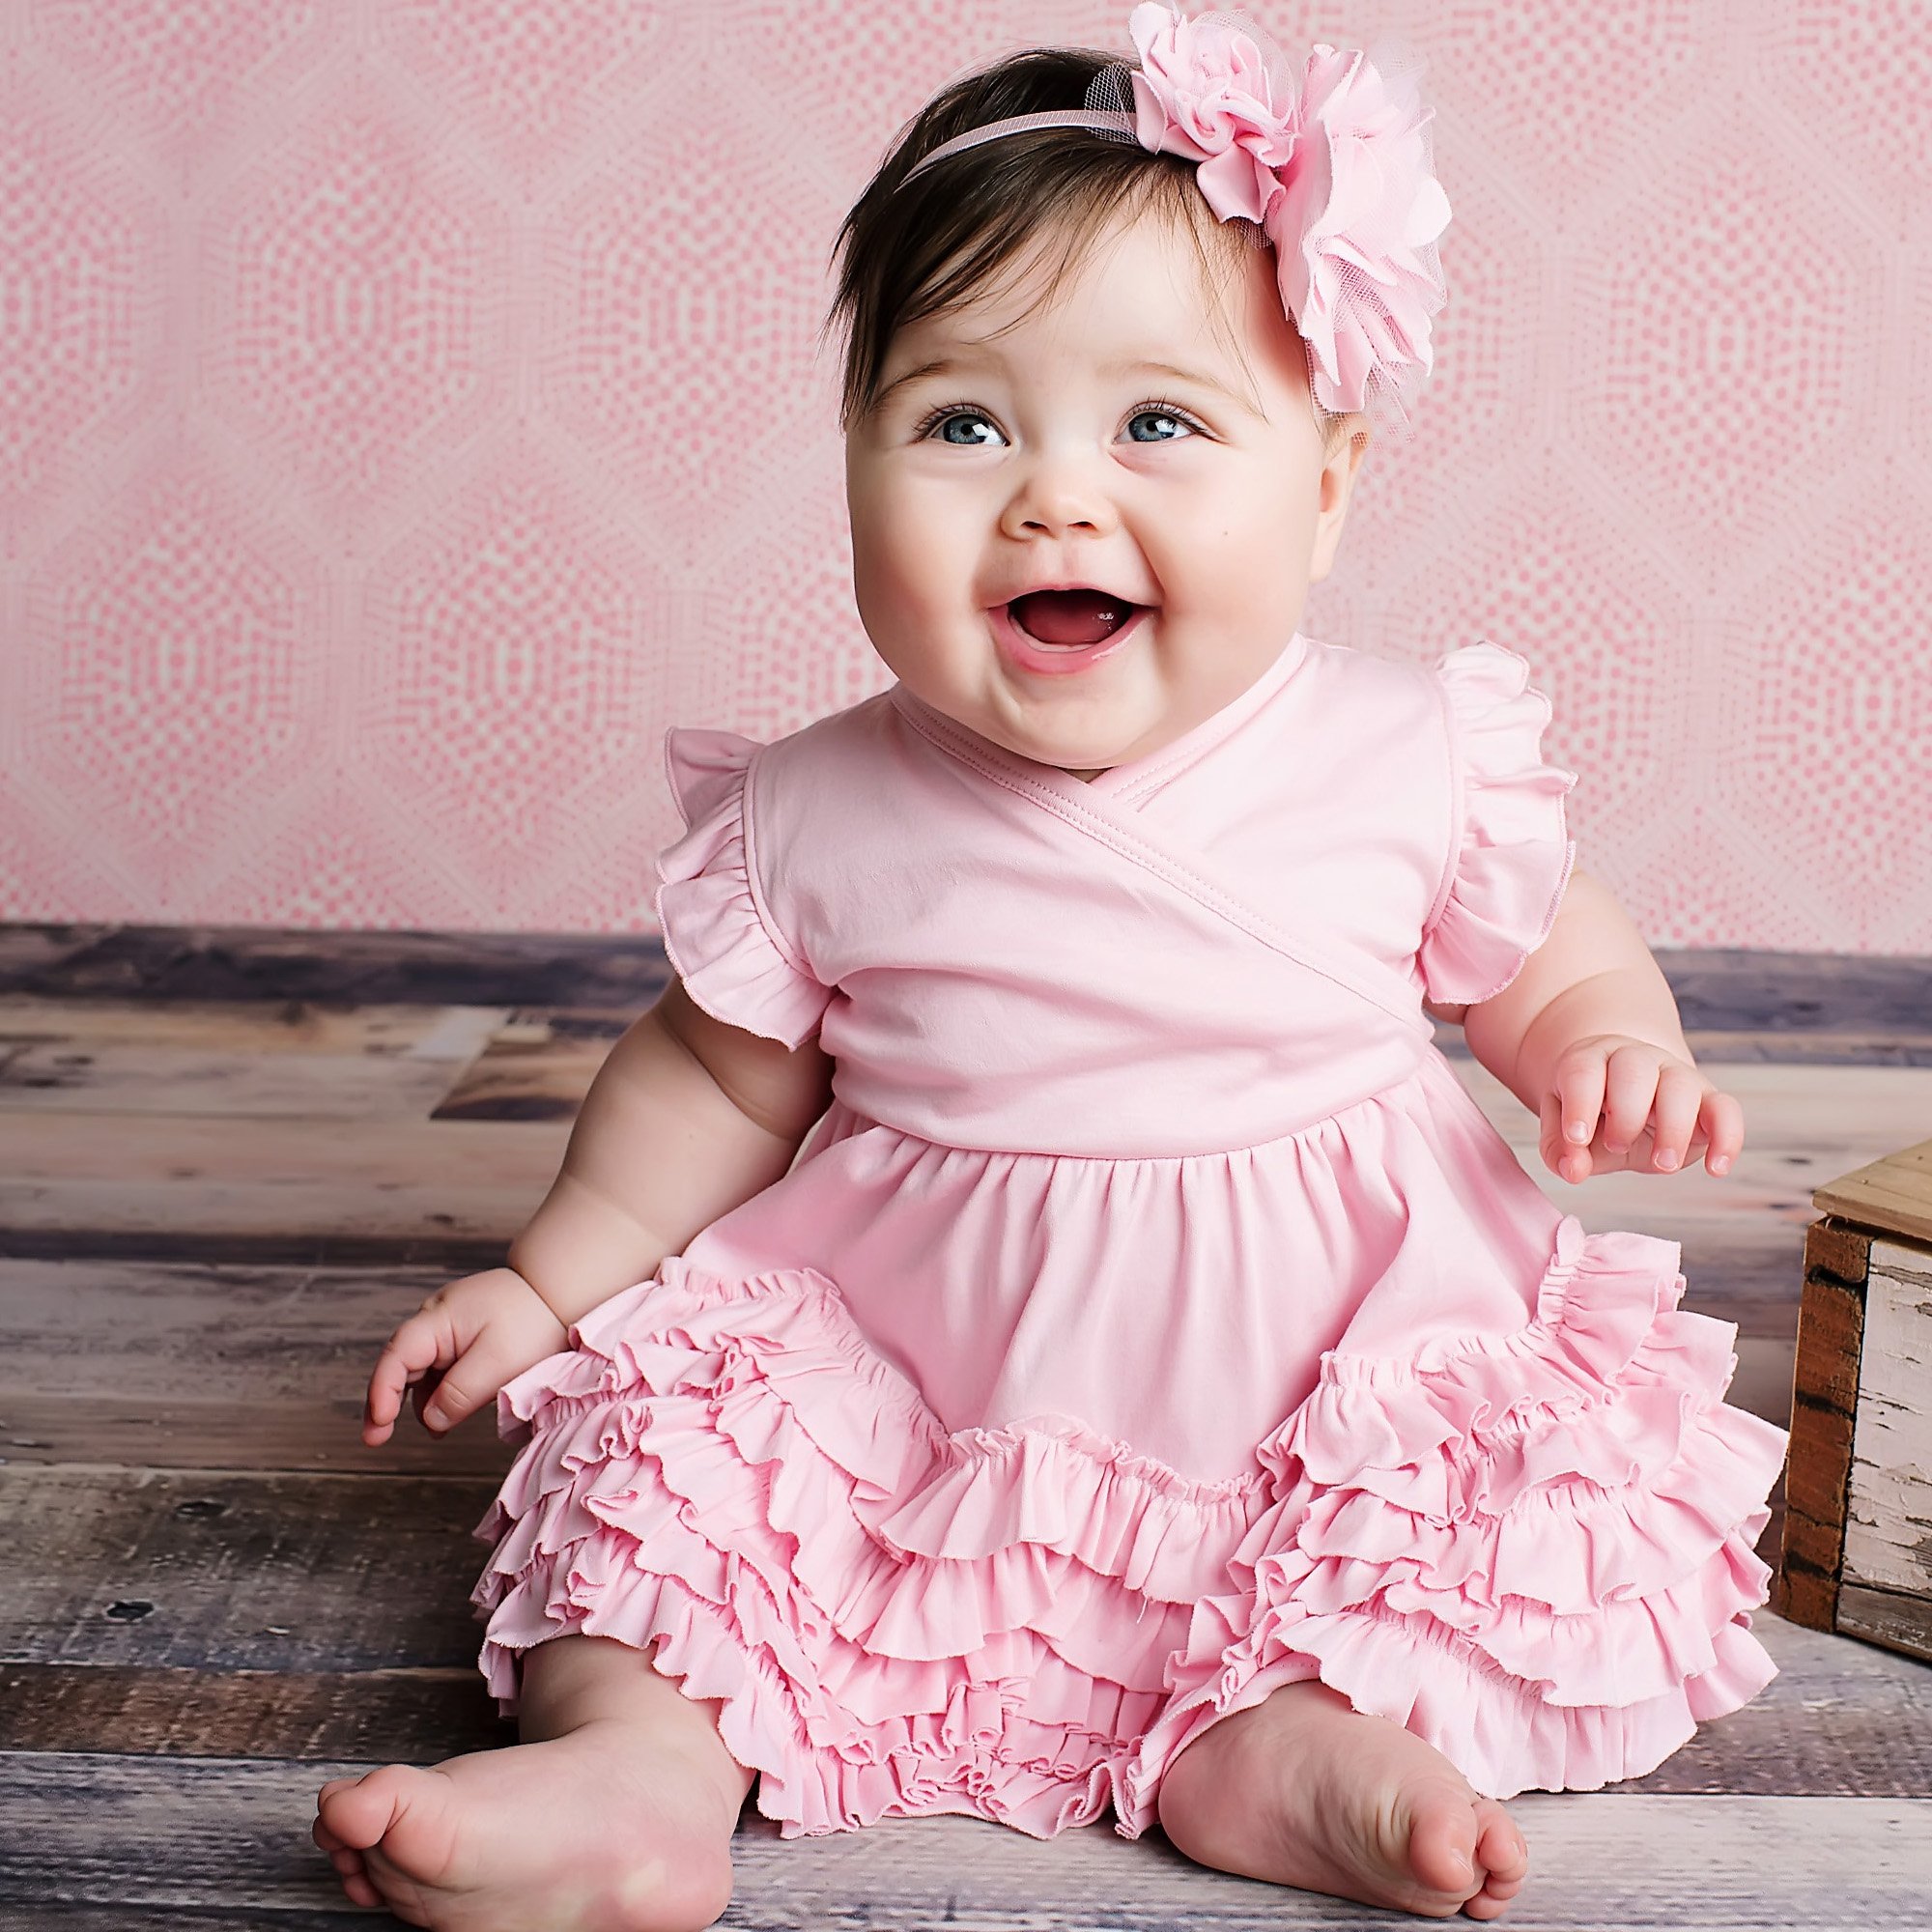 Pretty Baby Girl In Pink Dress Stock Photo, Picture and Royalty Free Image.  Image 30287335.